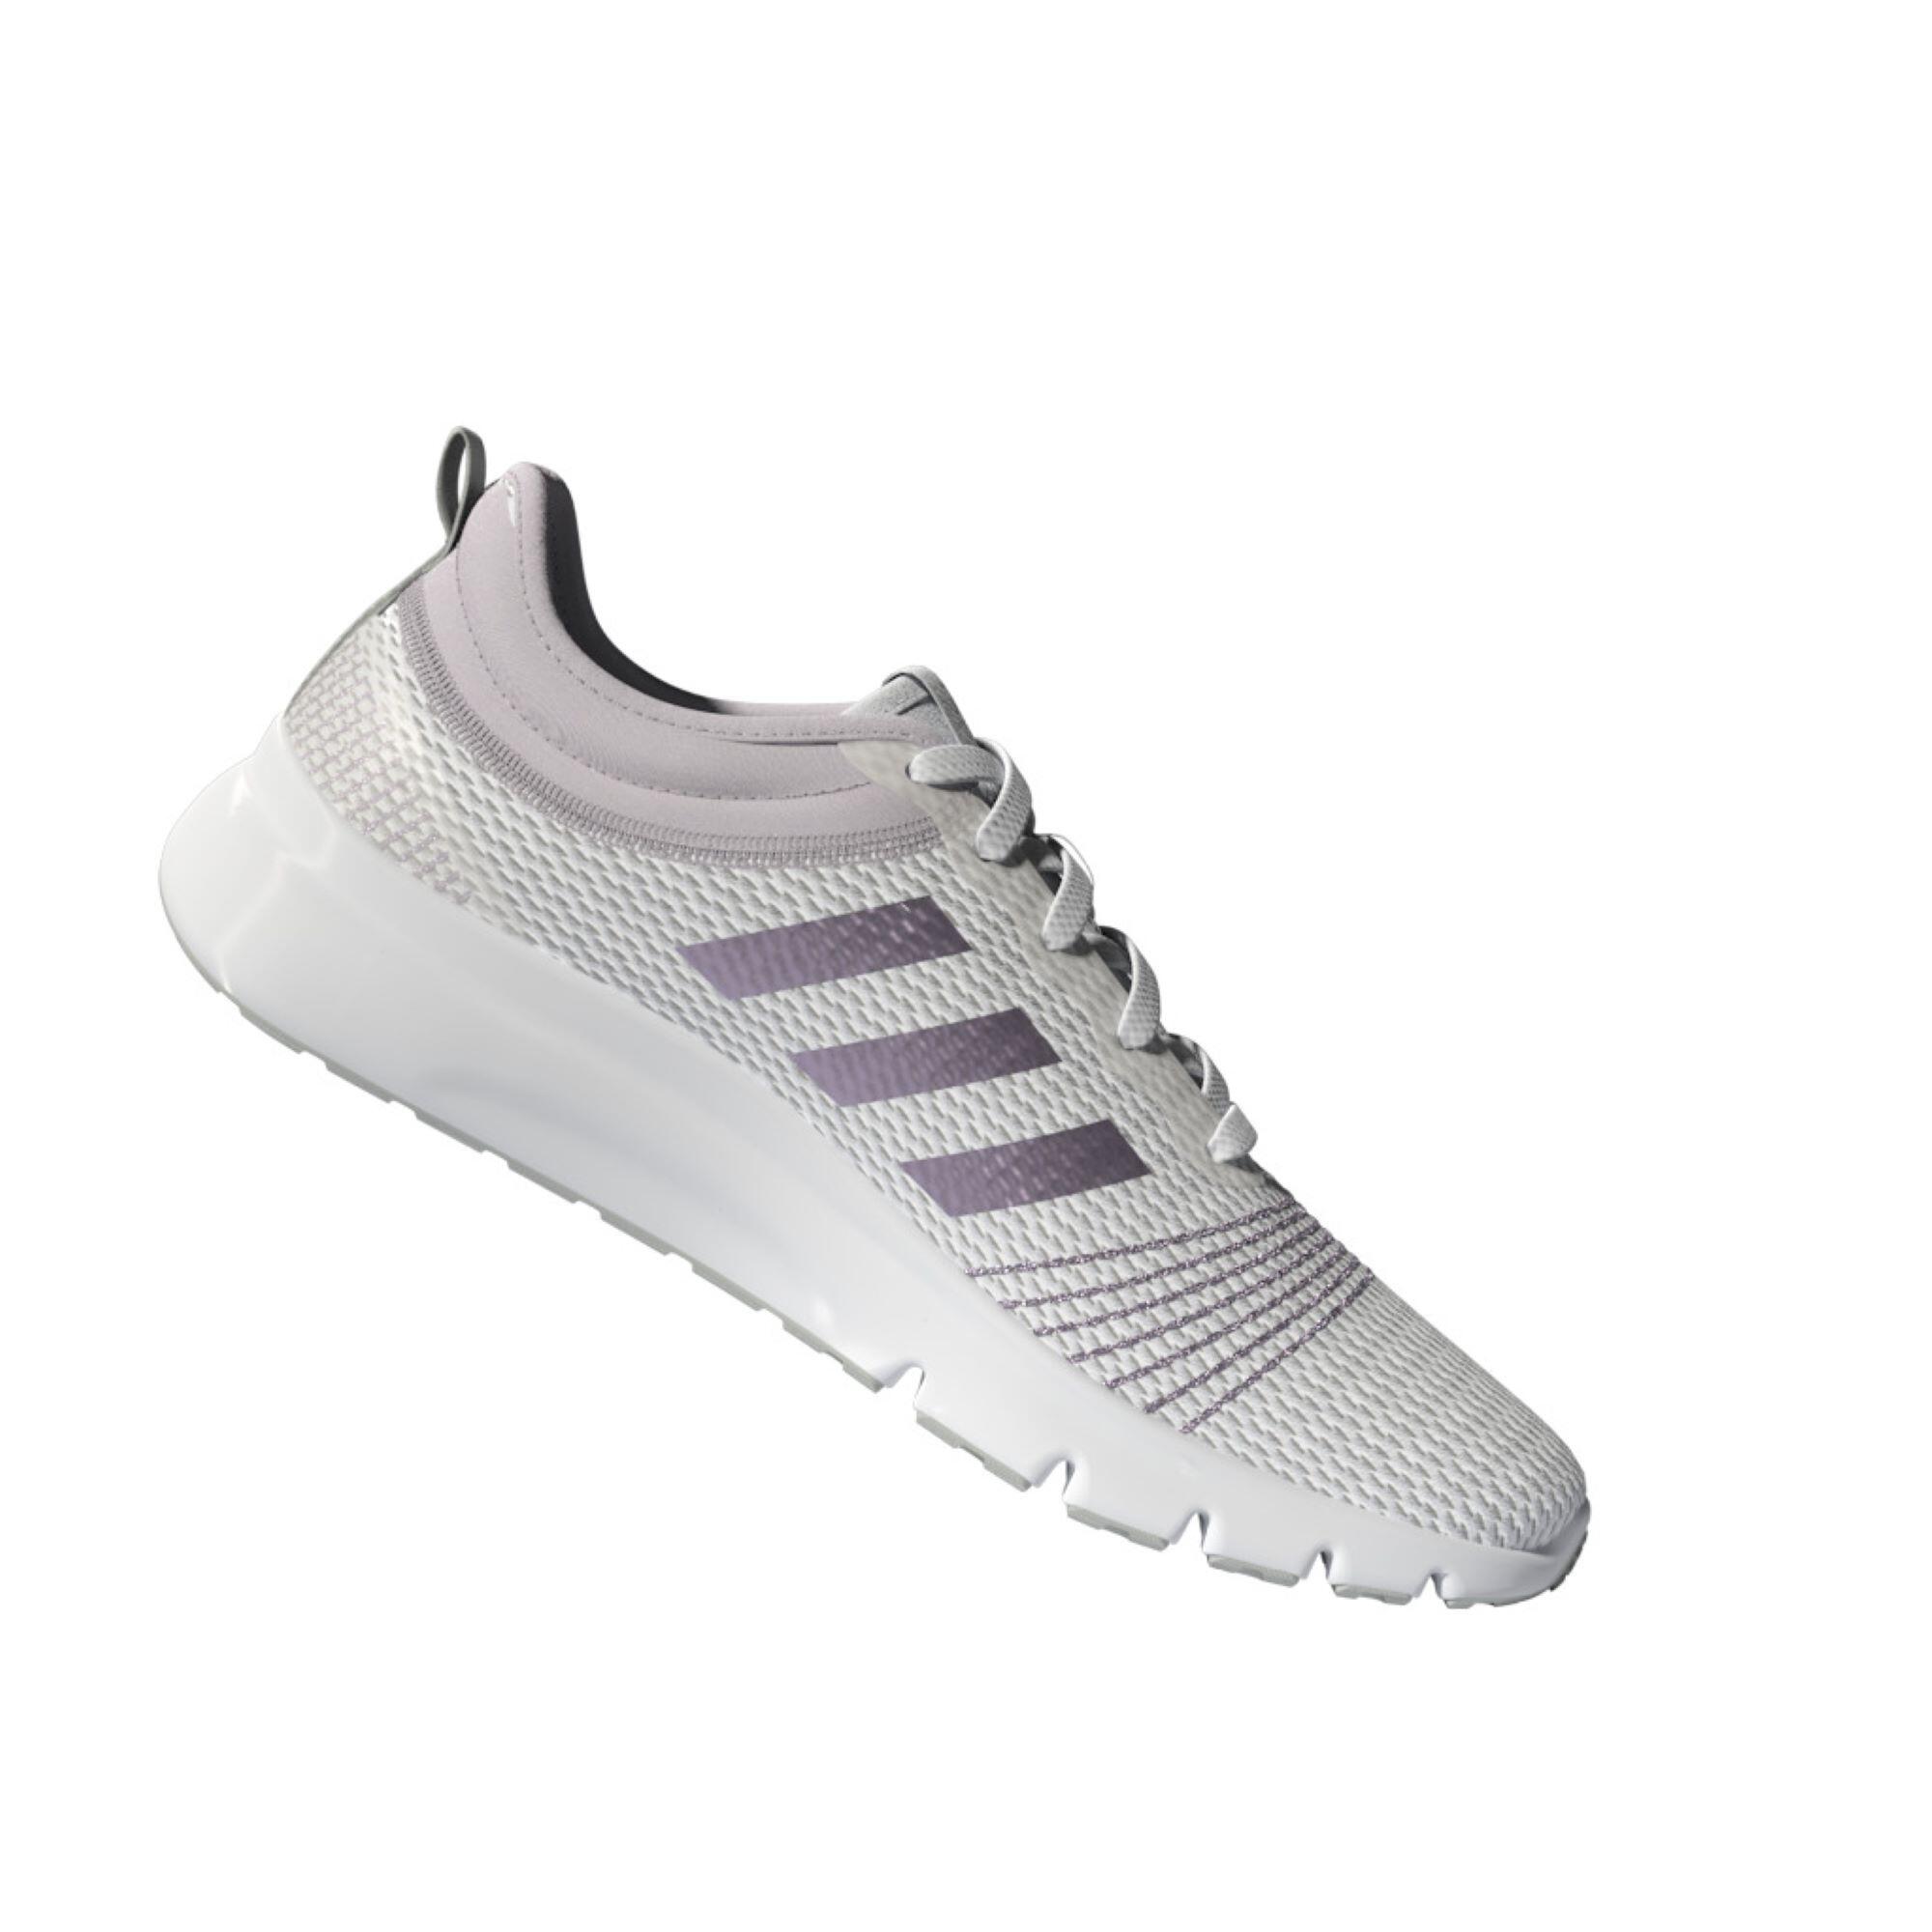 Fitness Shoes Fluidup - White 5/7